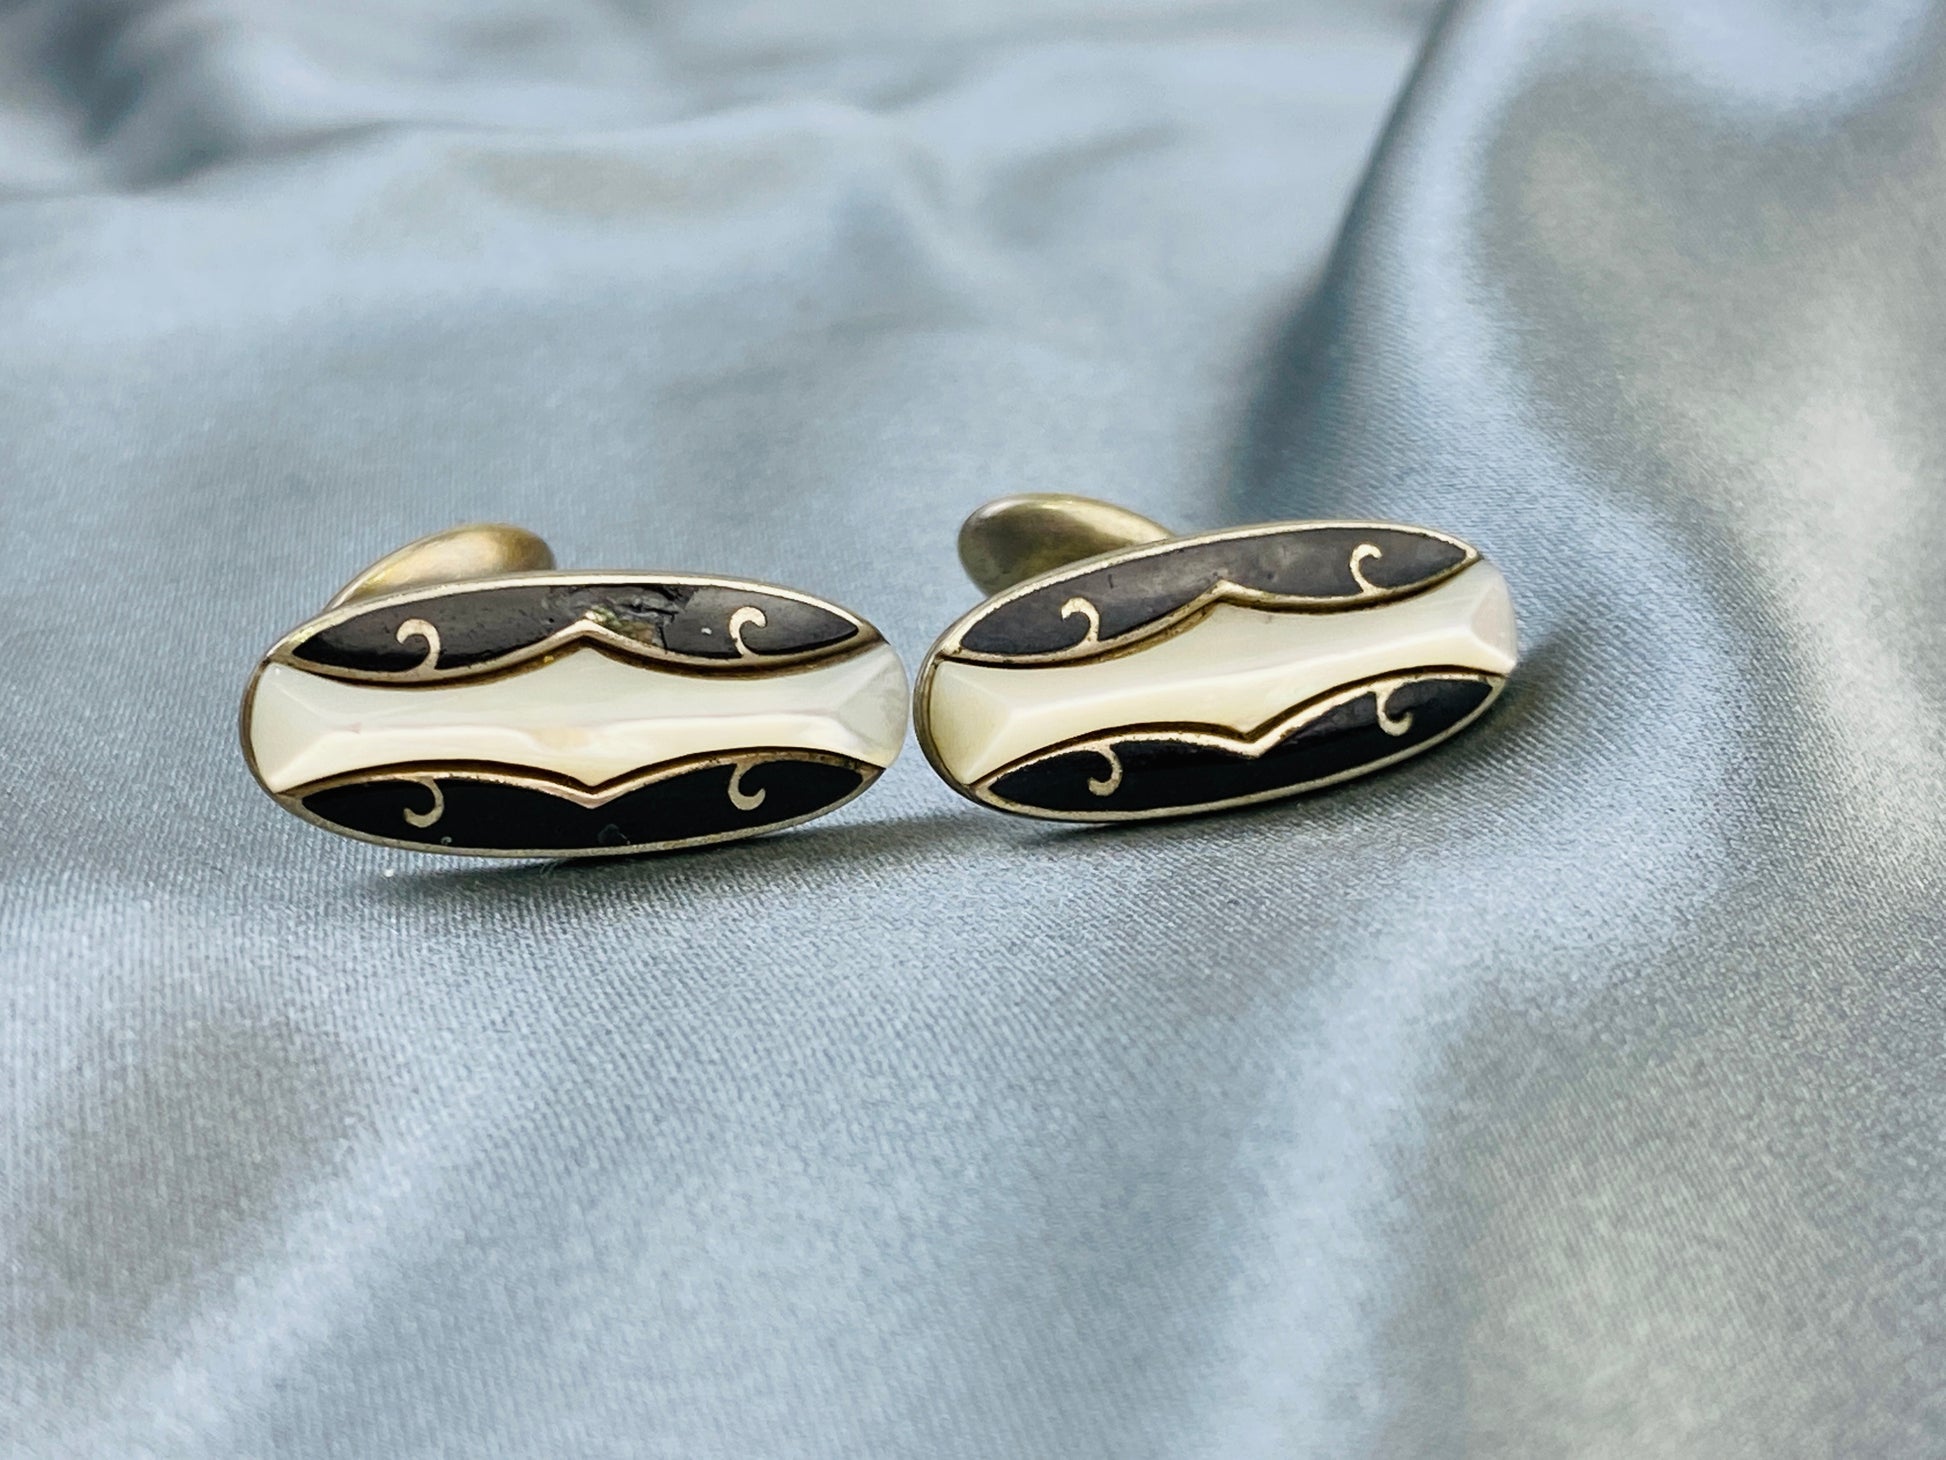 Antique Men's Silver Oval Cufflinks, Black & White Inlay, Curved Bar & Bean Back